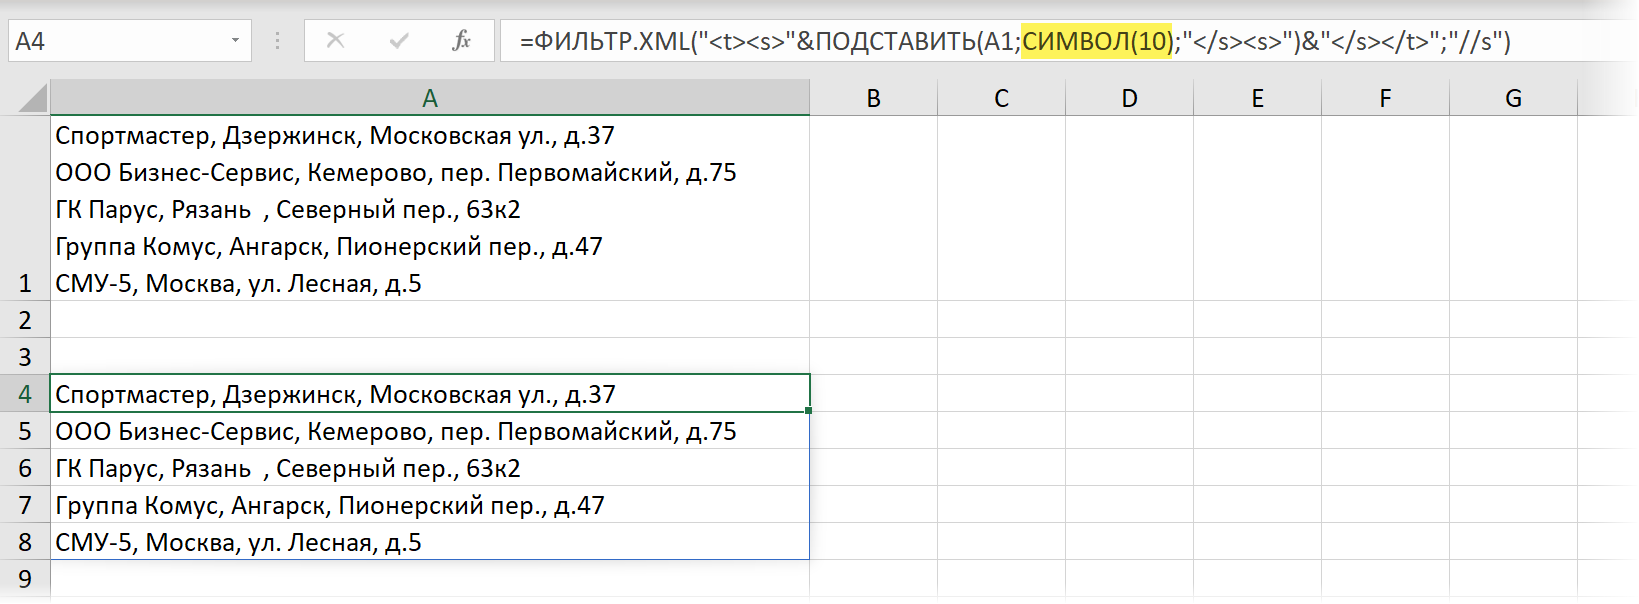 Dividing sticky text with the FILTER.XML function